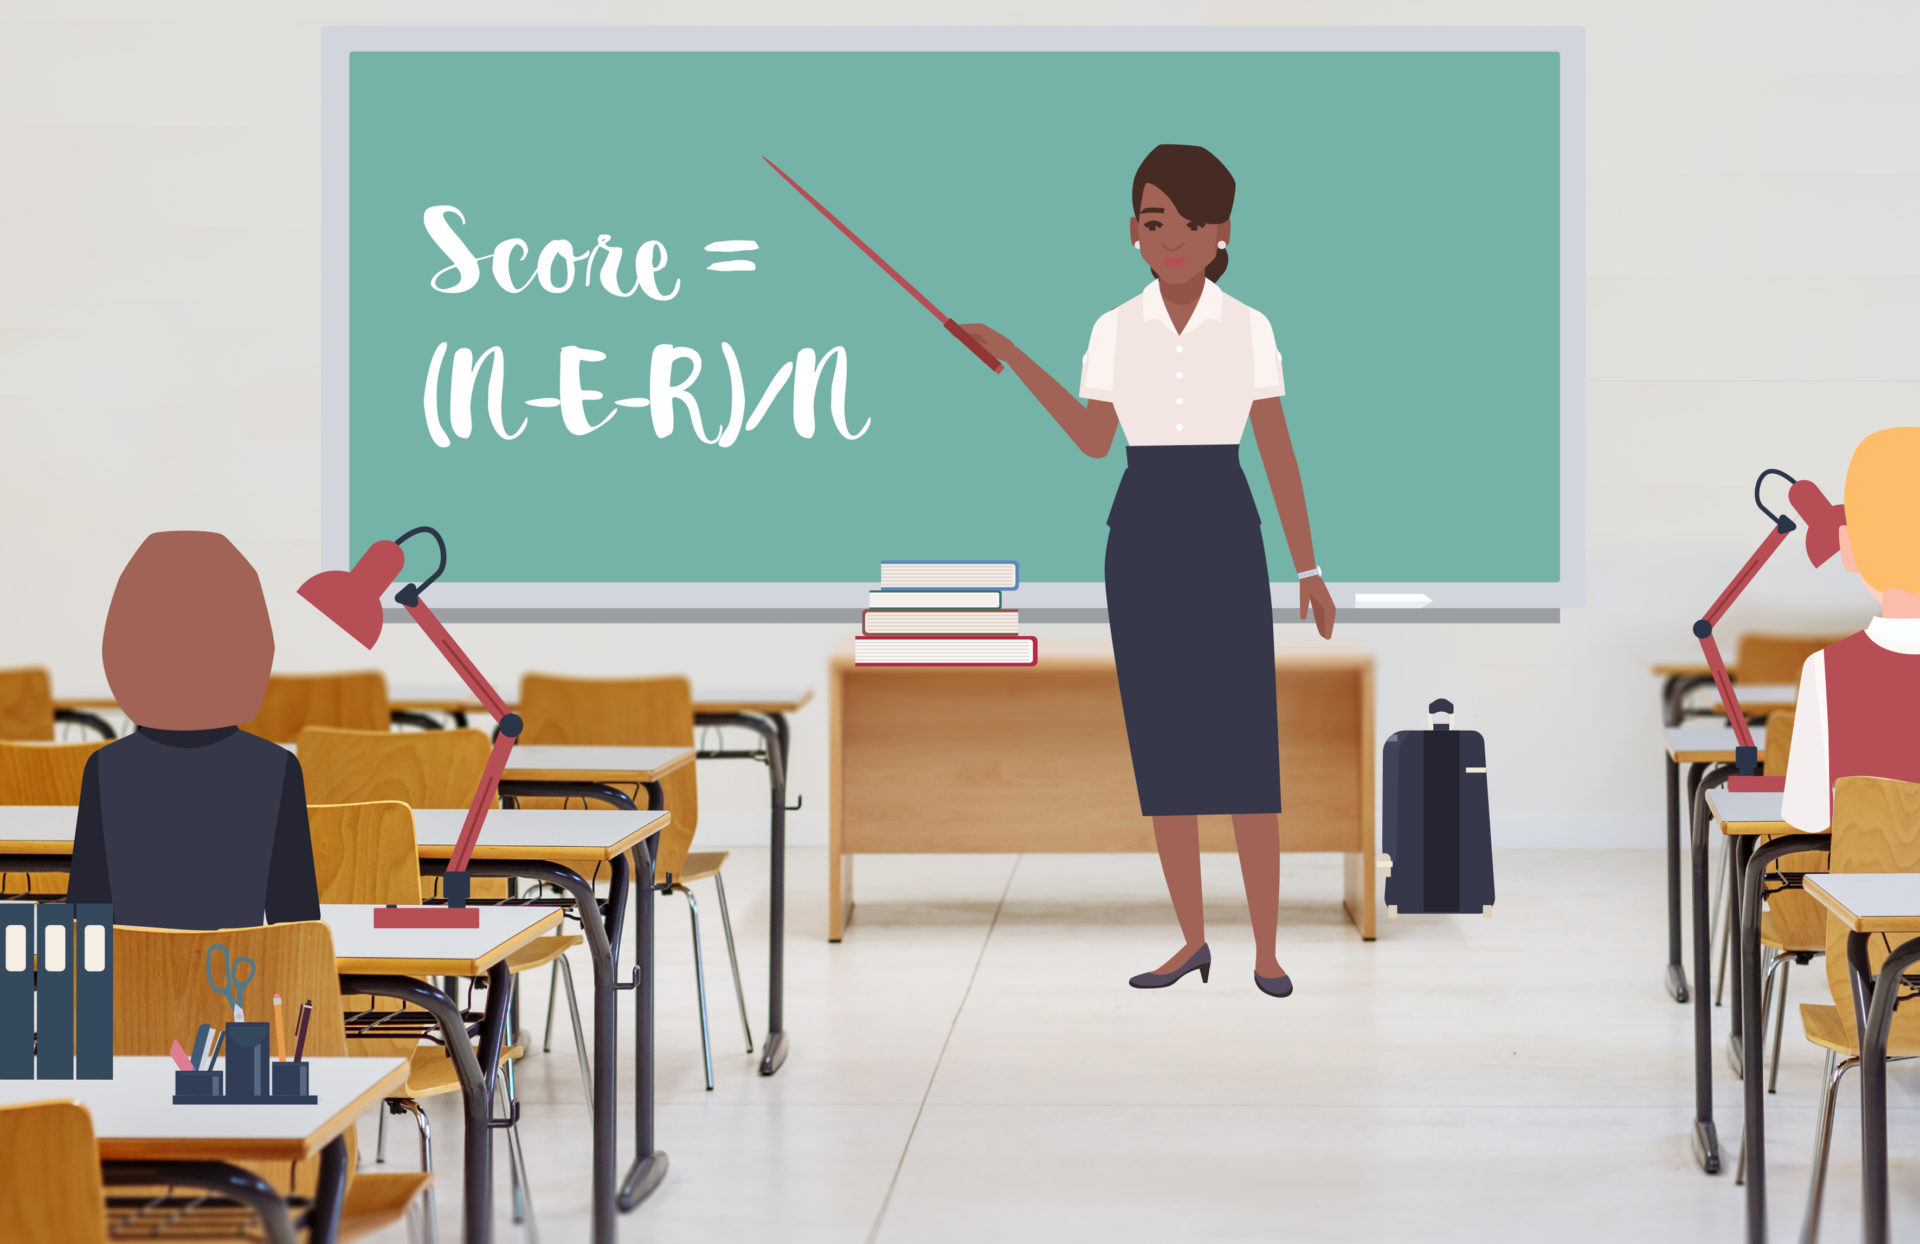 A teacher in a classroom points to writing on a blackboard. The writing is an equation that reads "Score equals N minus E minus R, then divided by N." There are two students in the classroom socially distancing at desks.